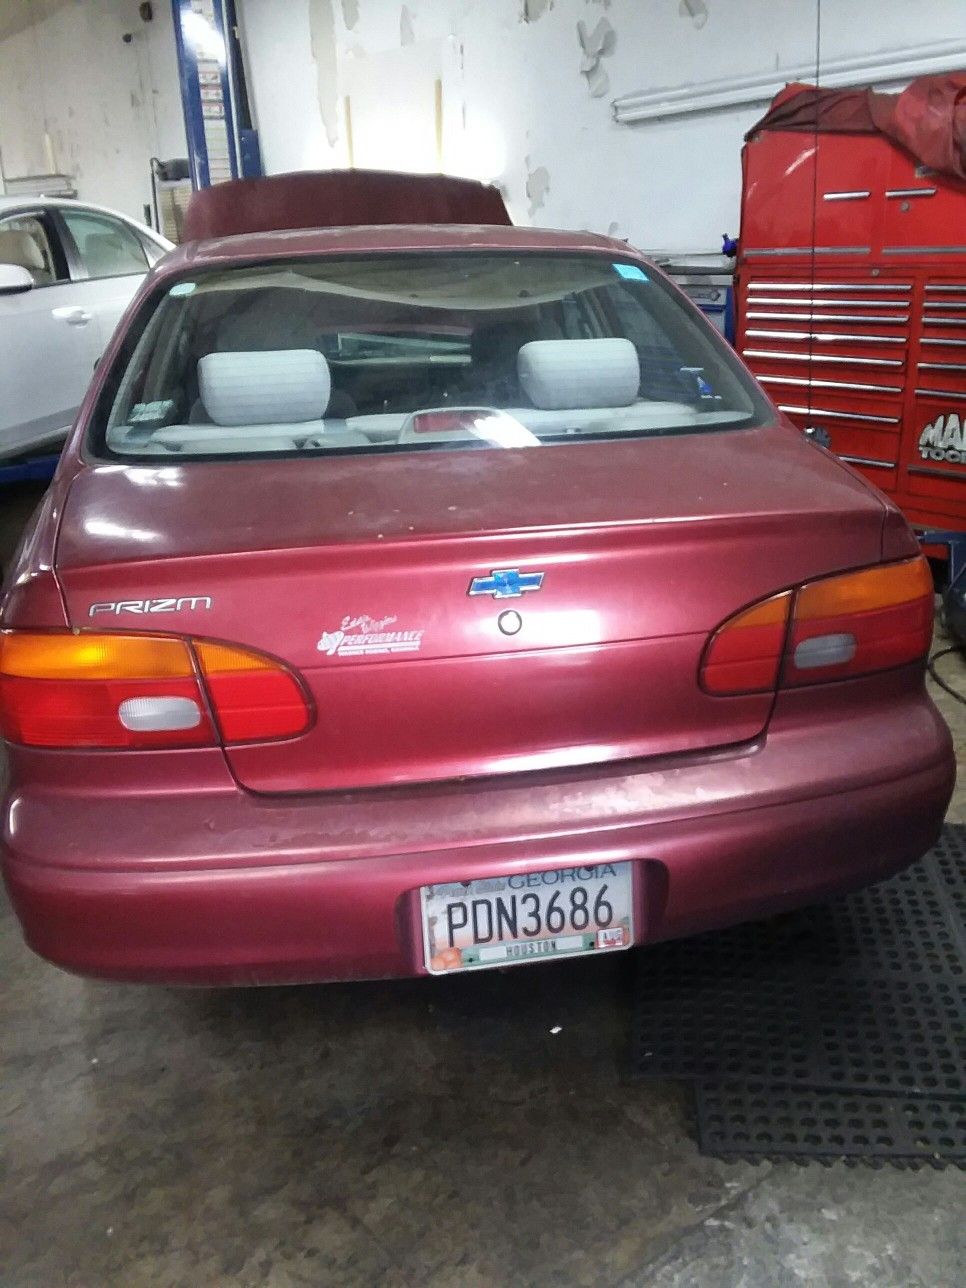 2000 Chevy prizm for parts